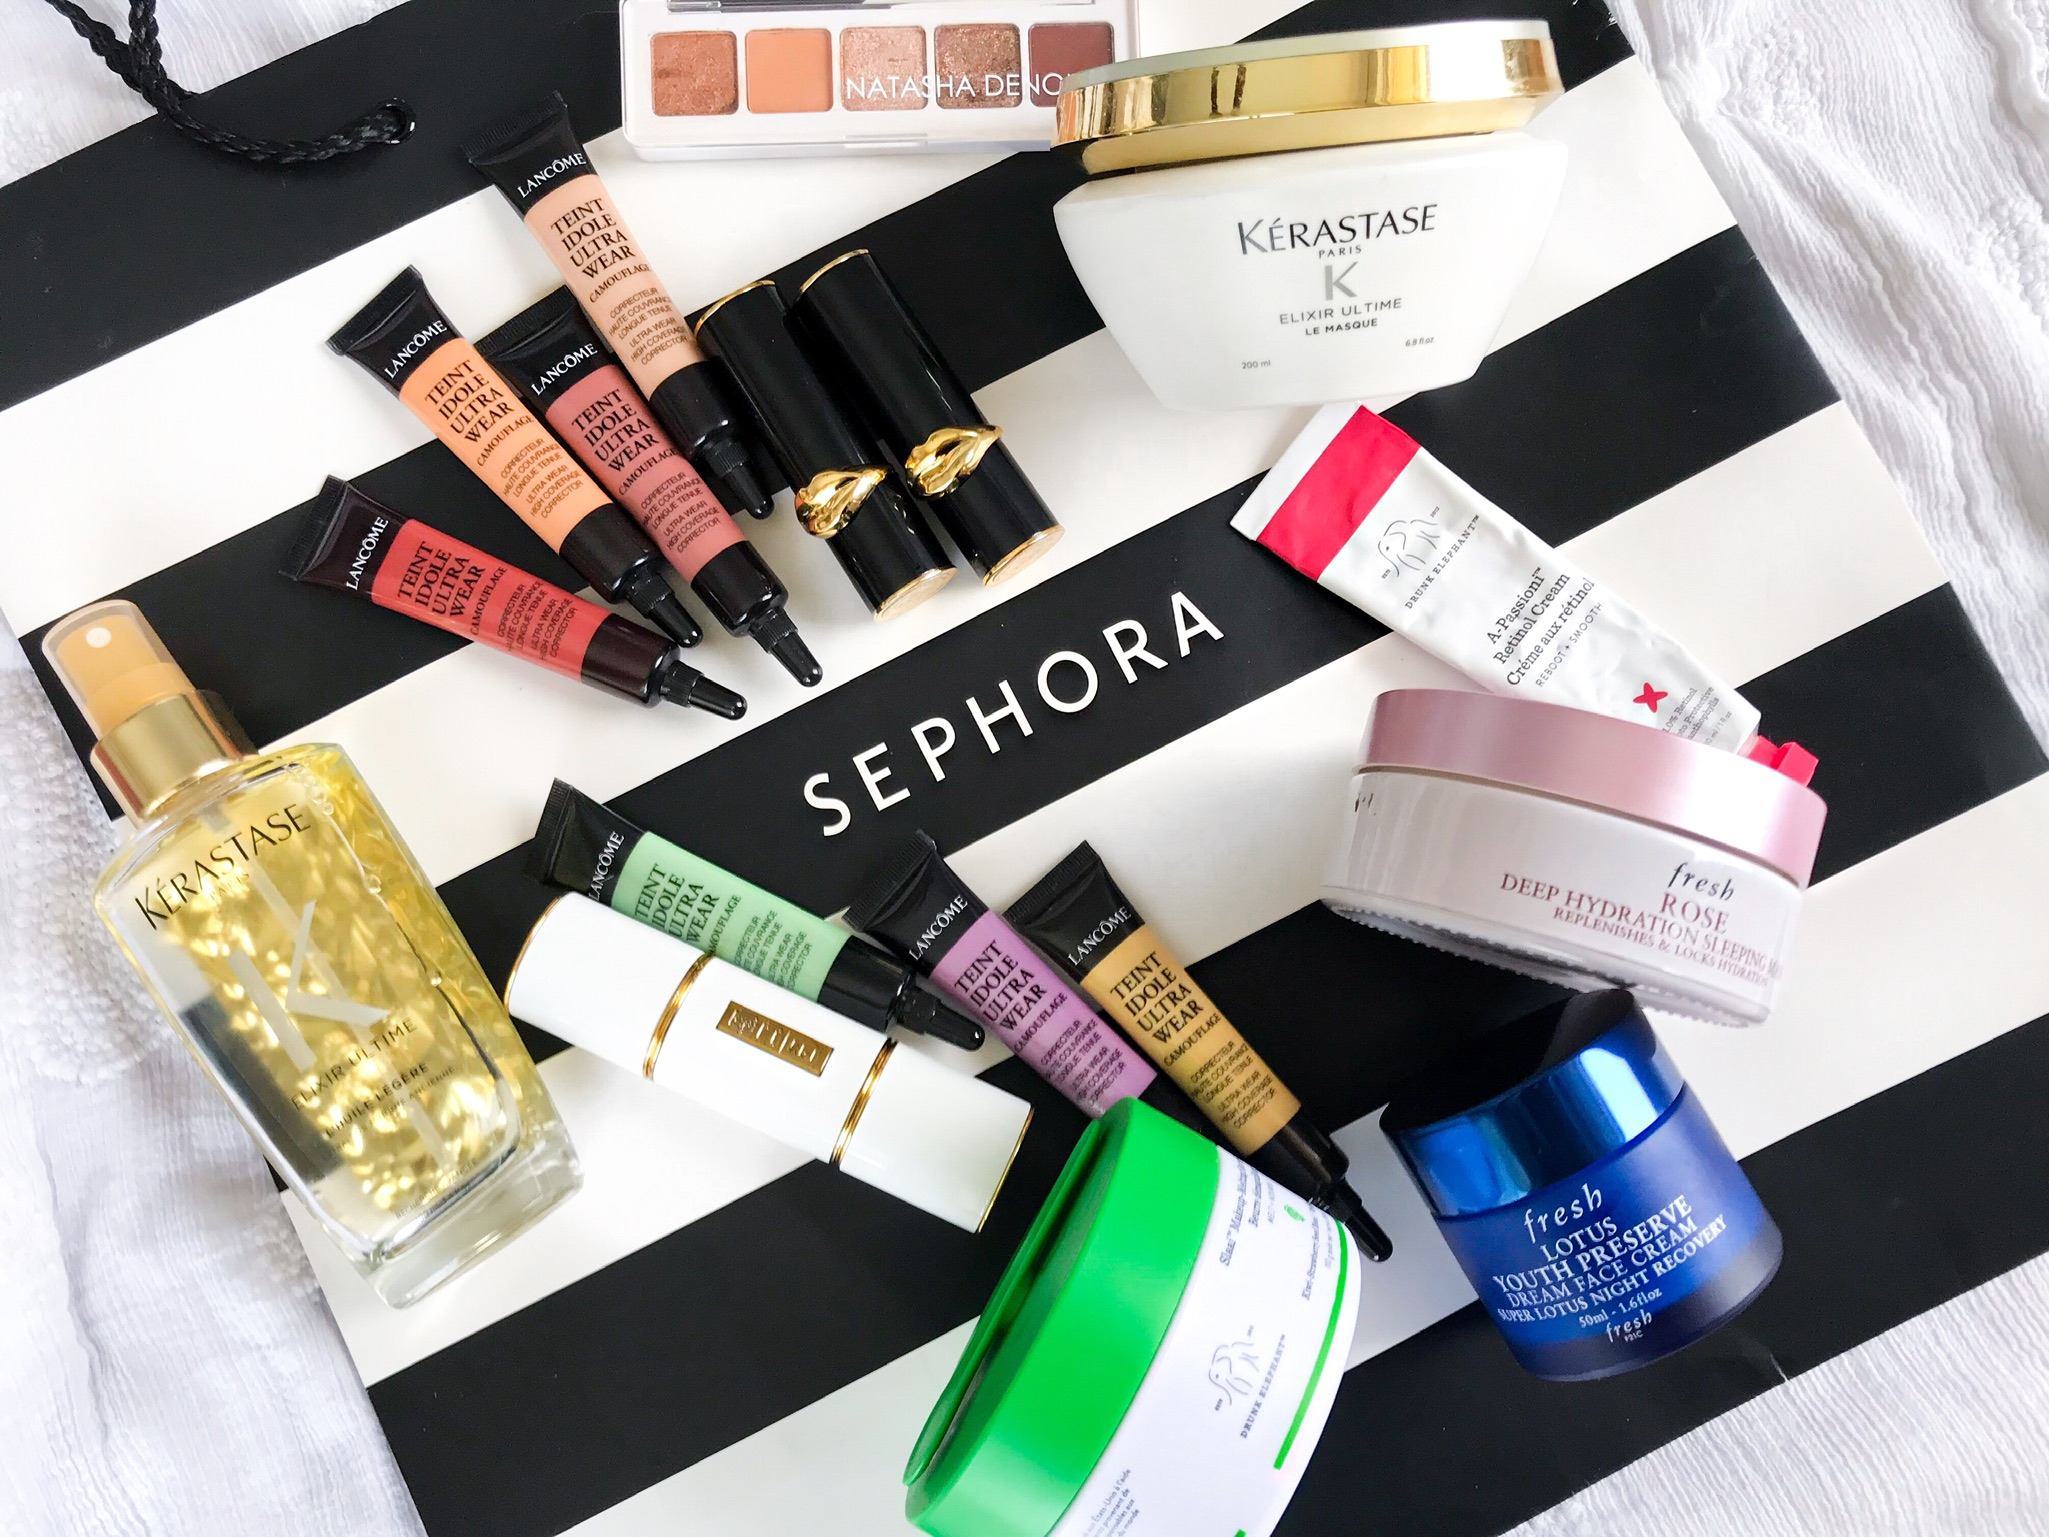 Sephora SemiAnnual VIB Sale 10 NEW Products to Add To Your Cart